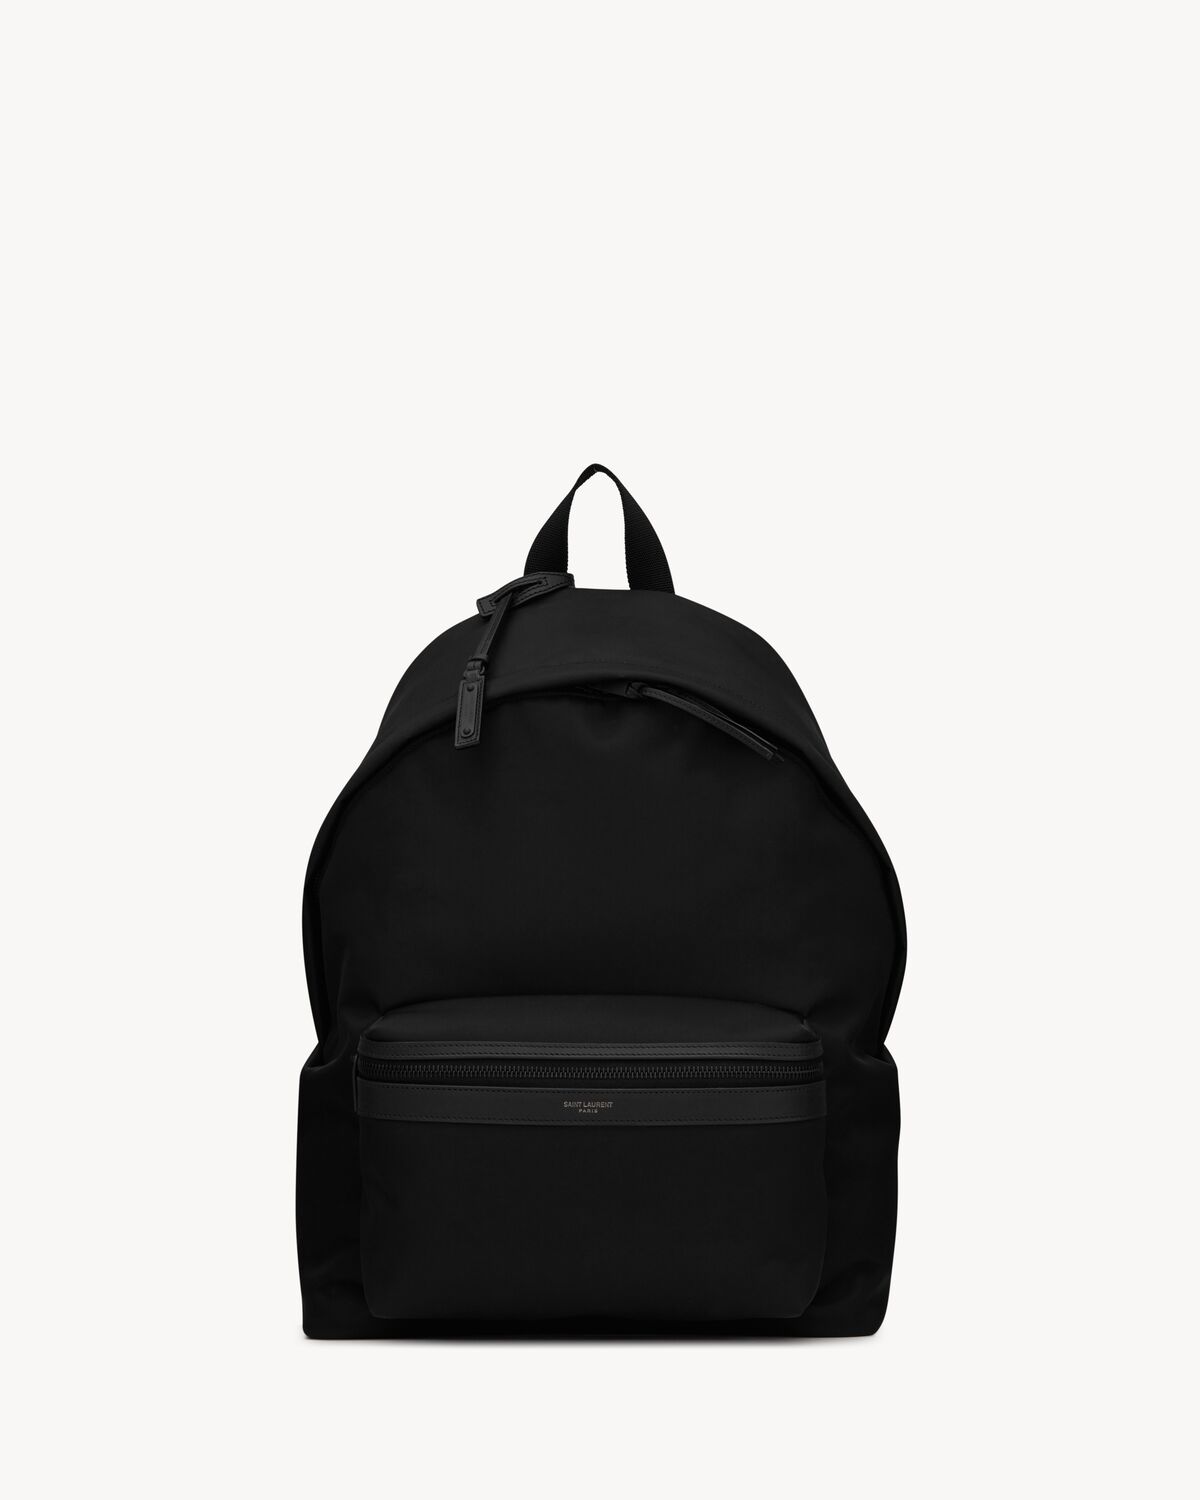 City backpack in ECONYL®, smooth leather and nylon